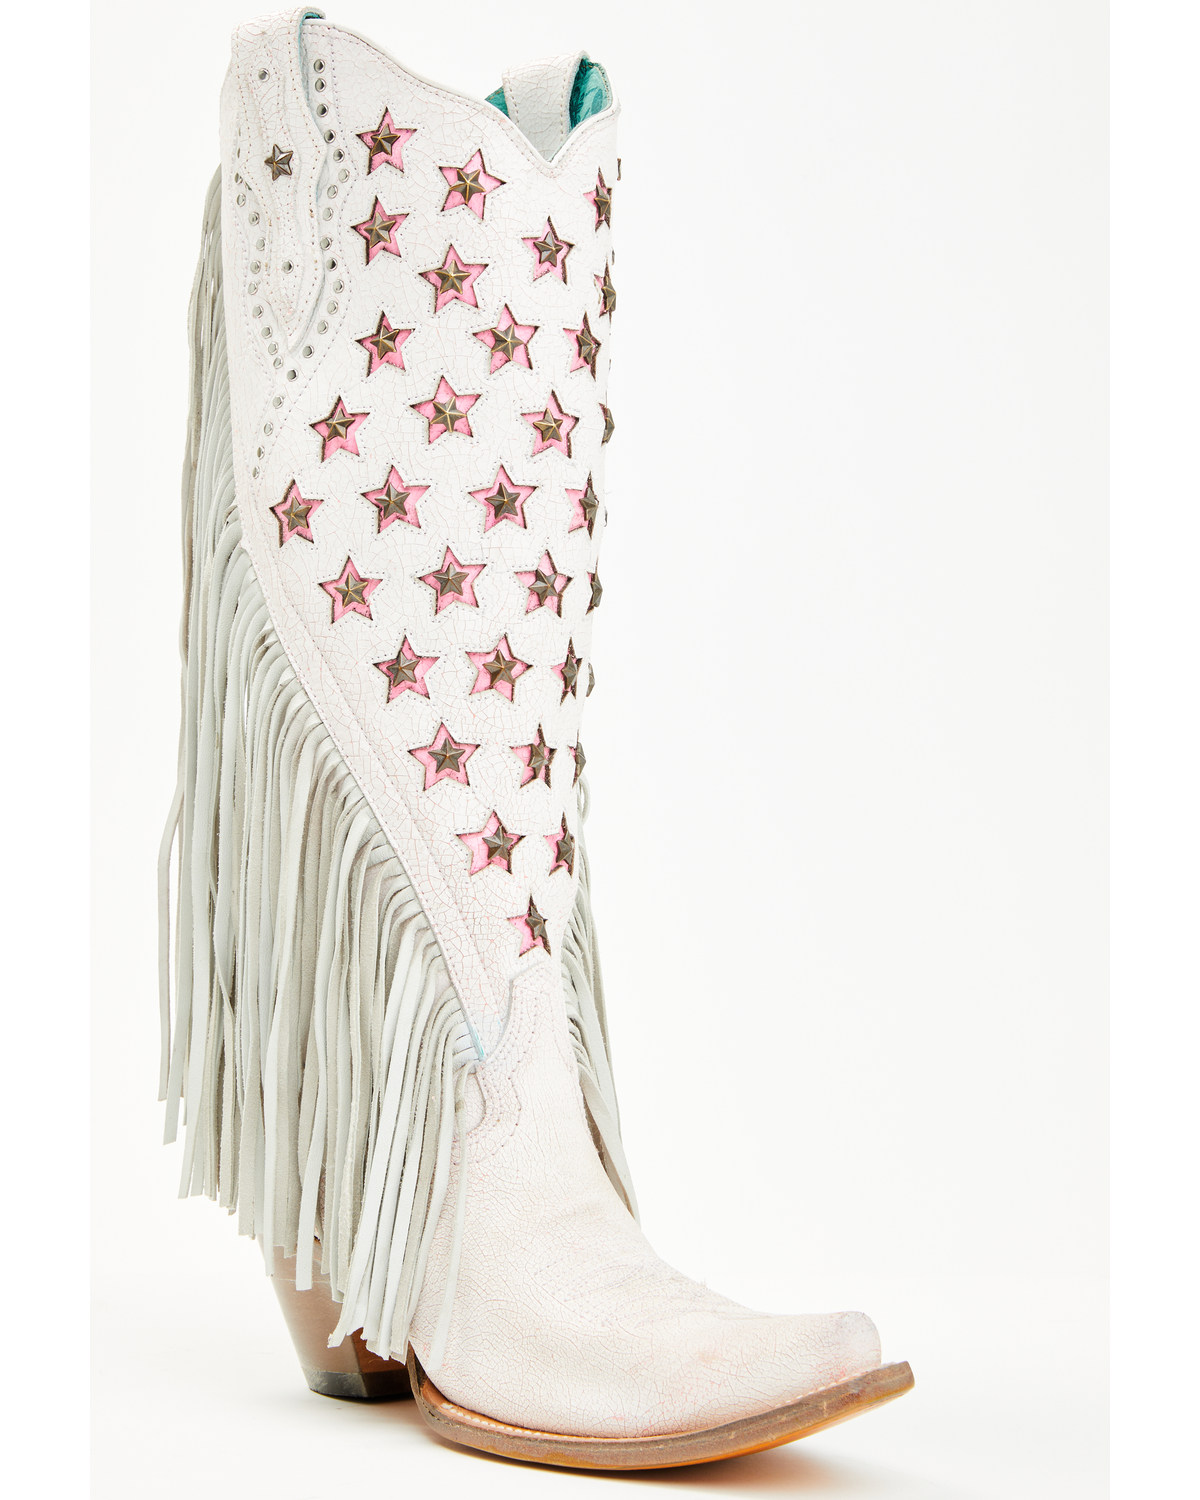 Corral Women's Star Inlay Fringe Tall Western Boots - Snip Toe